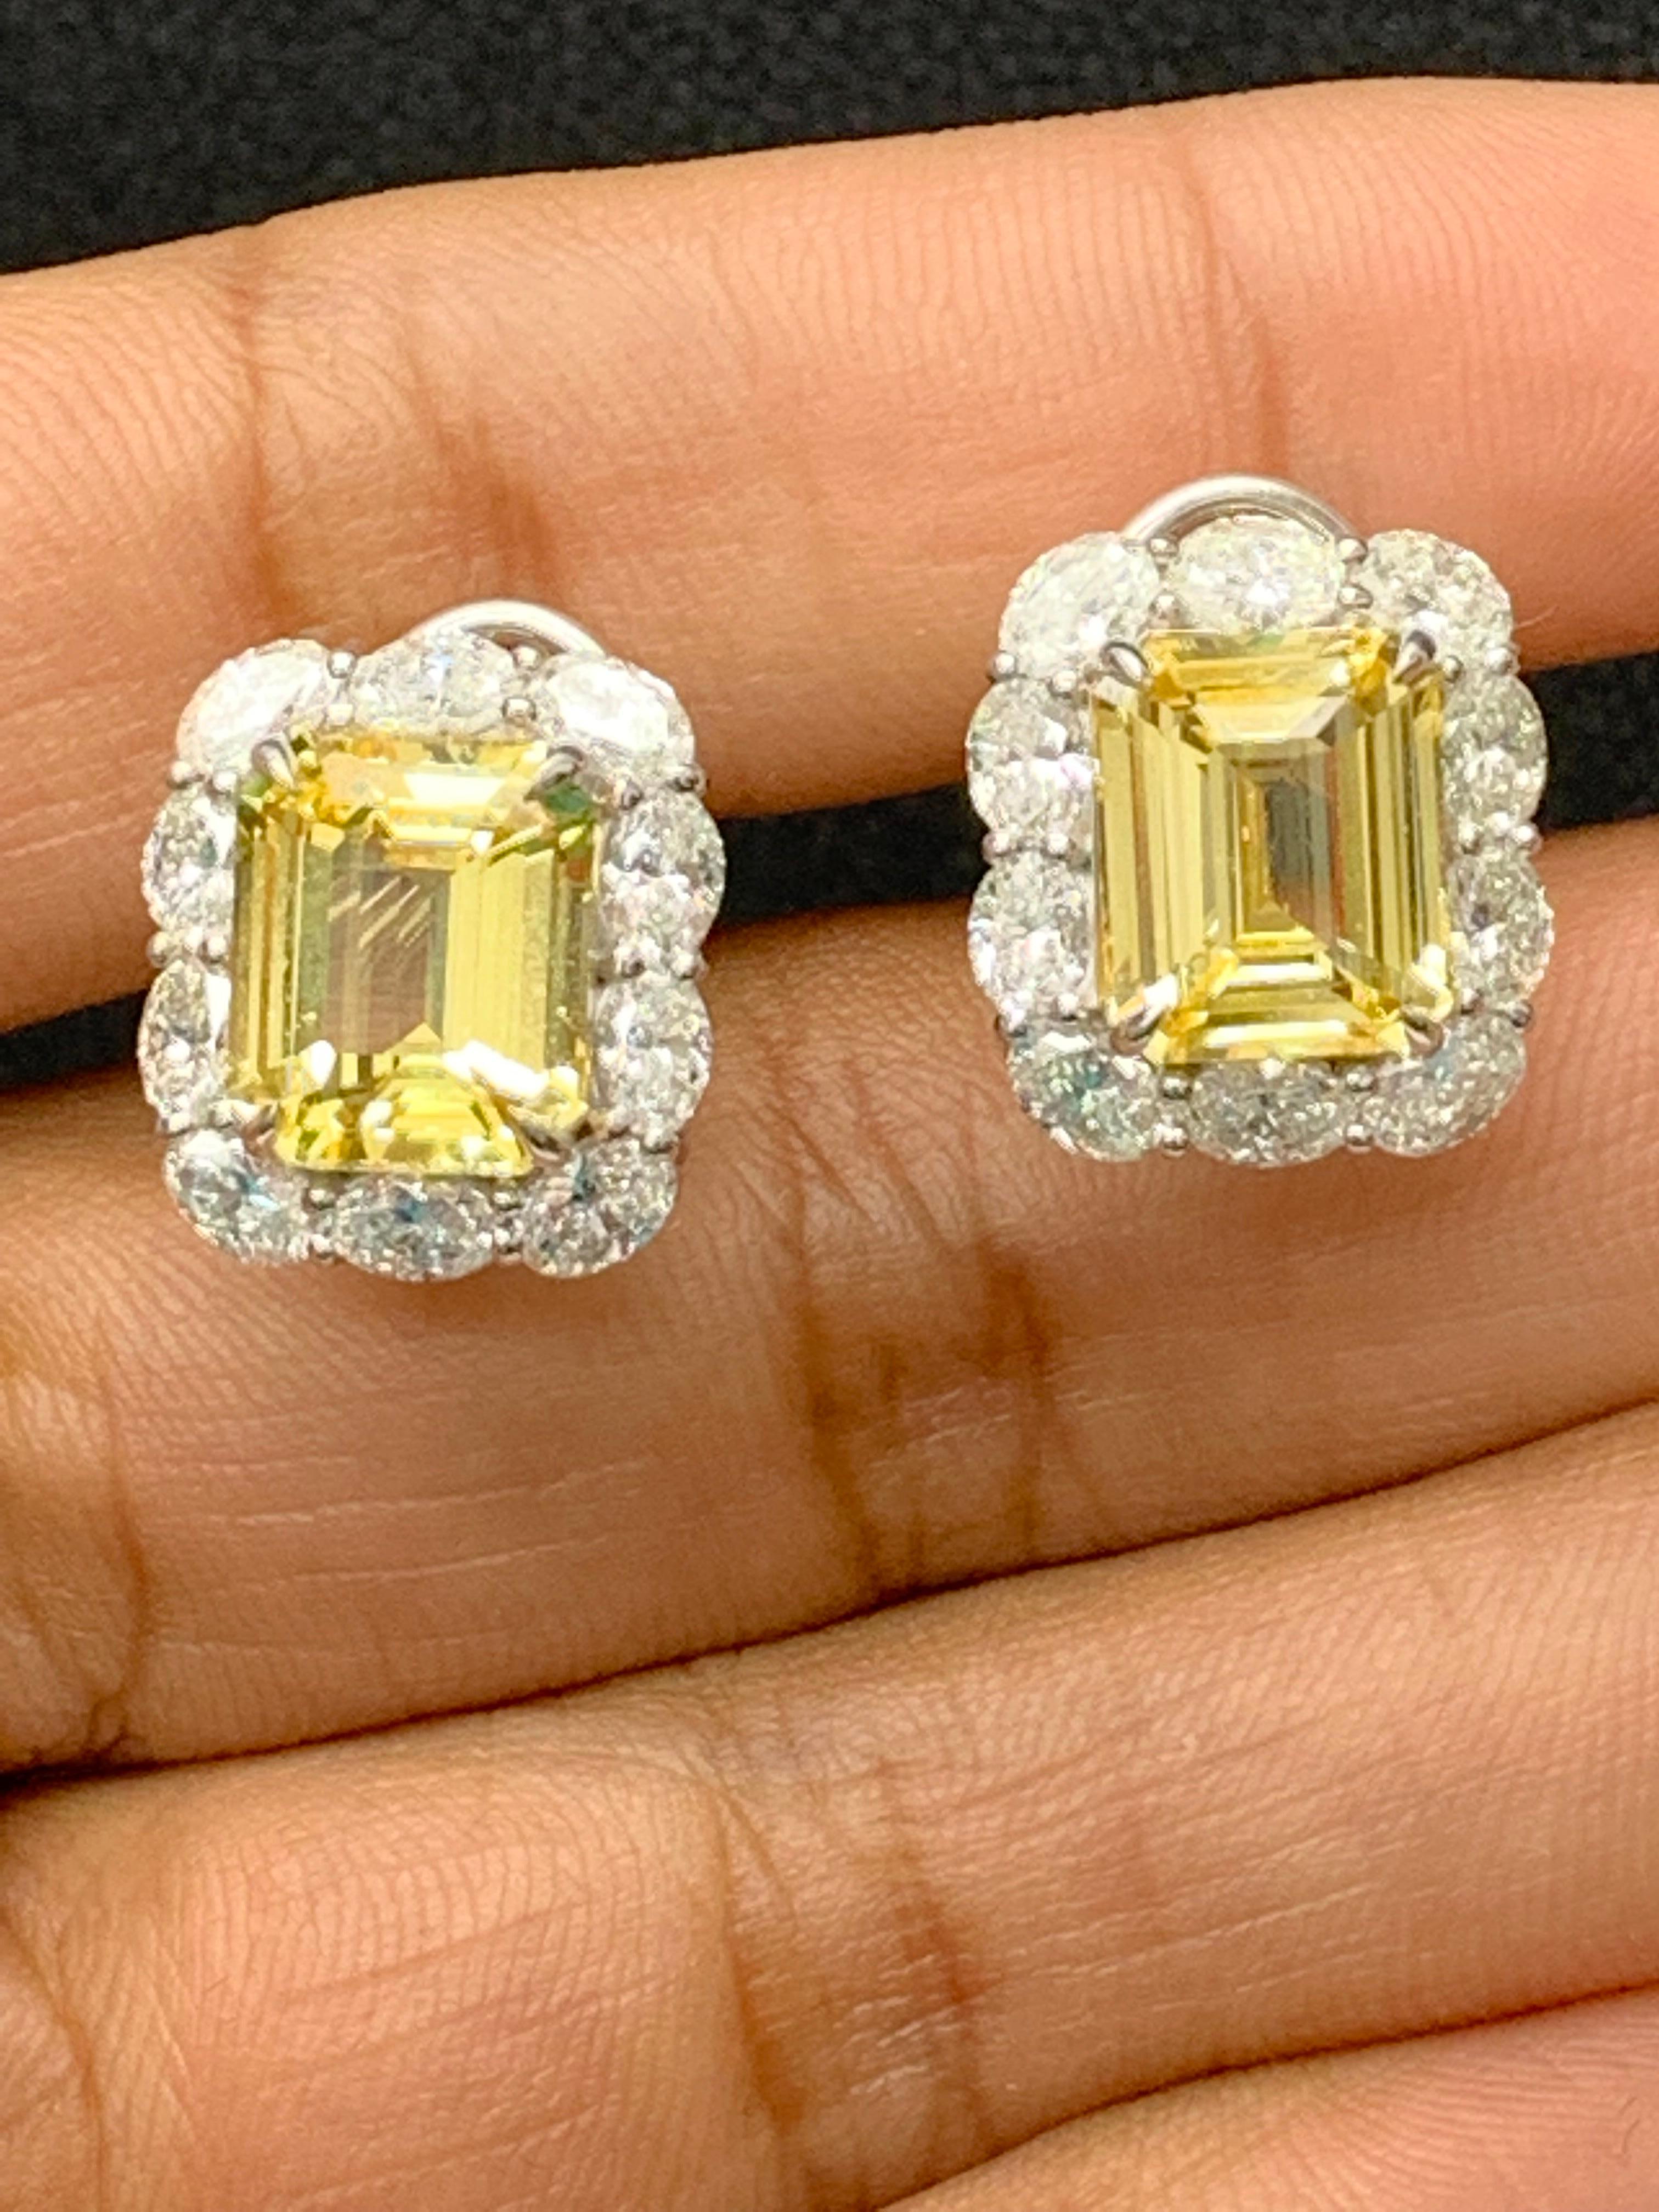 10.09 Carat Emerald Cut Yellow Sapphire Diamond Halo Earring in 18K White Gold For Sale 5